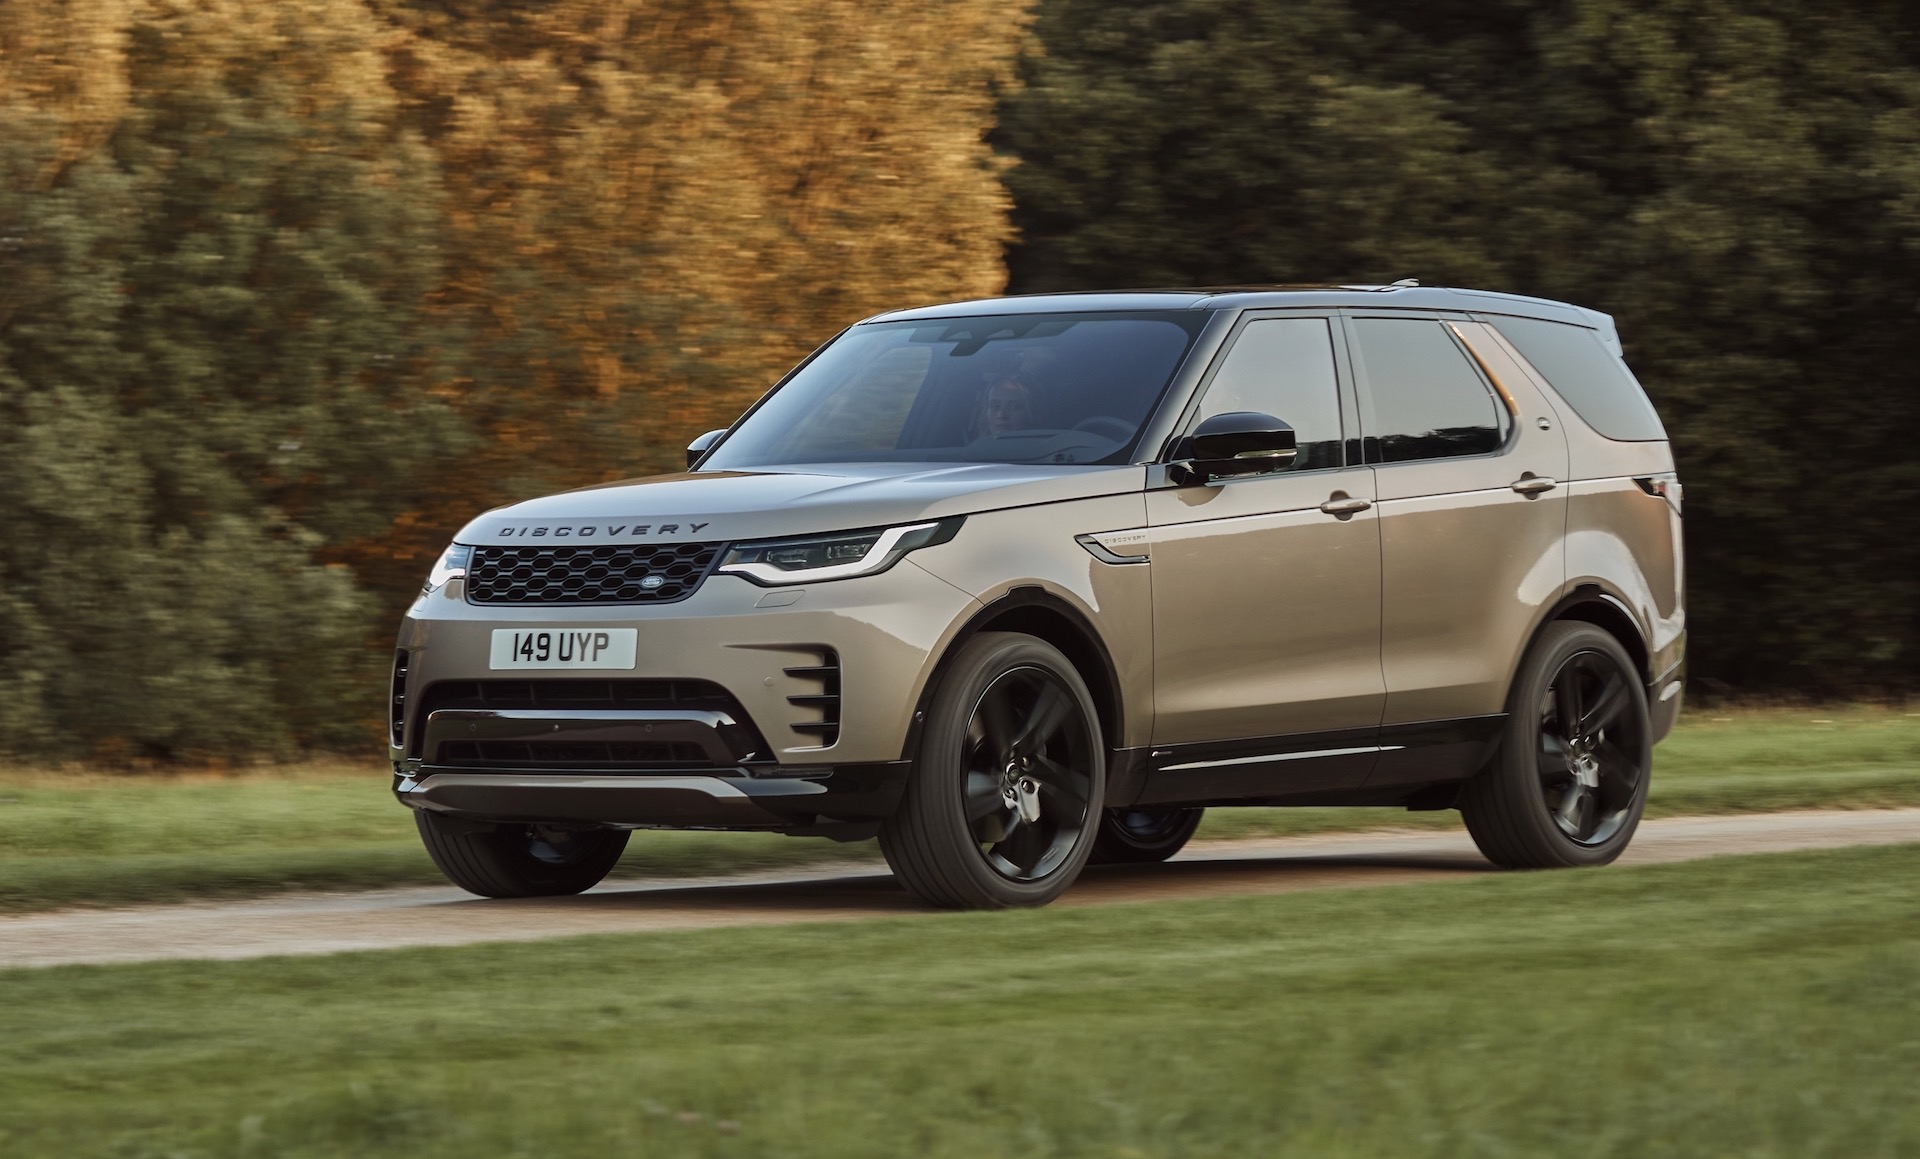 2021 Land Rover Discovery update gets inline-6 engines